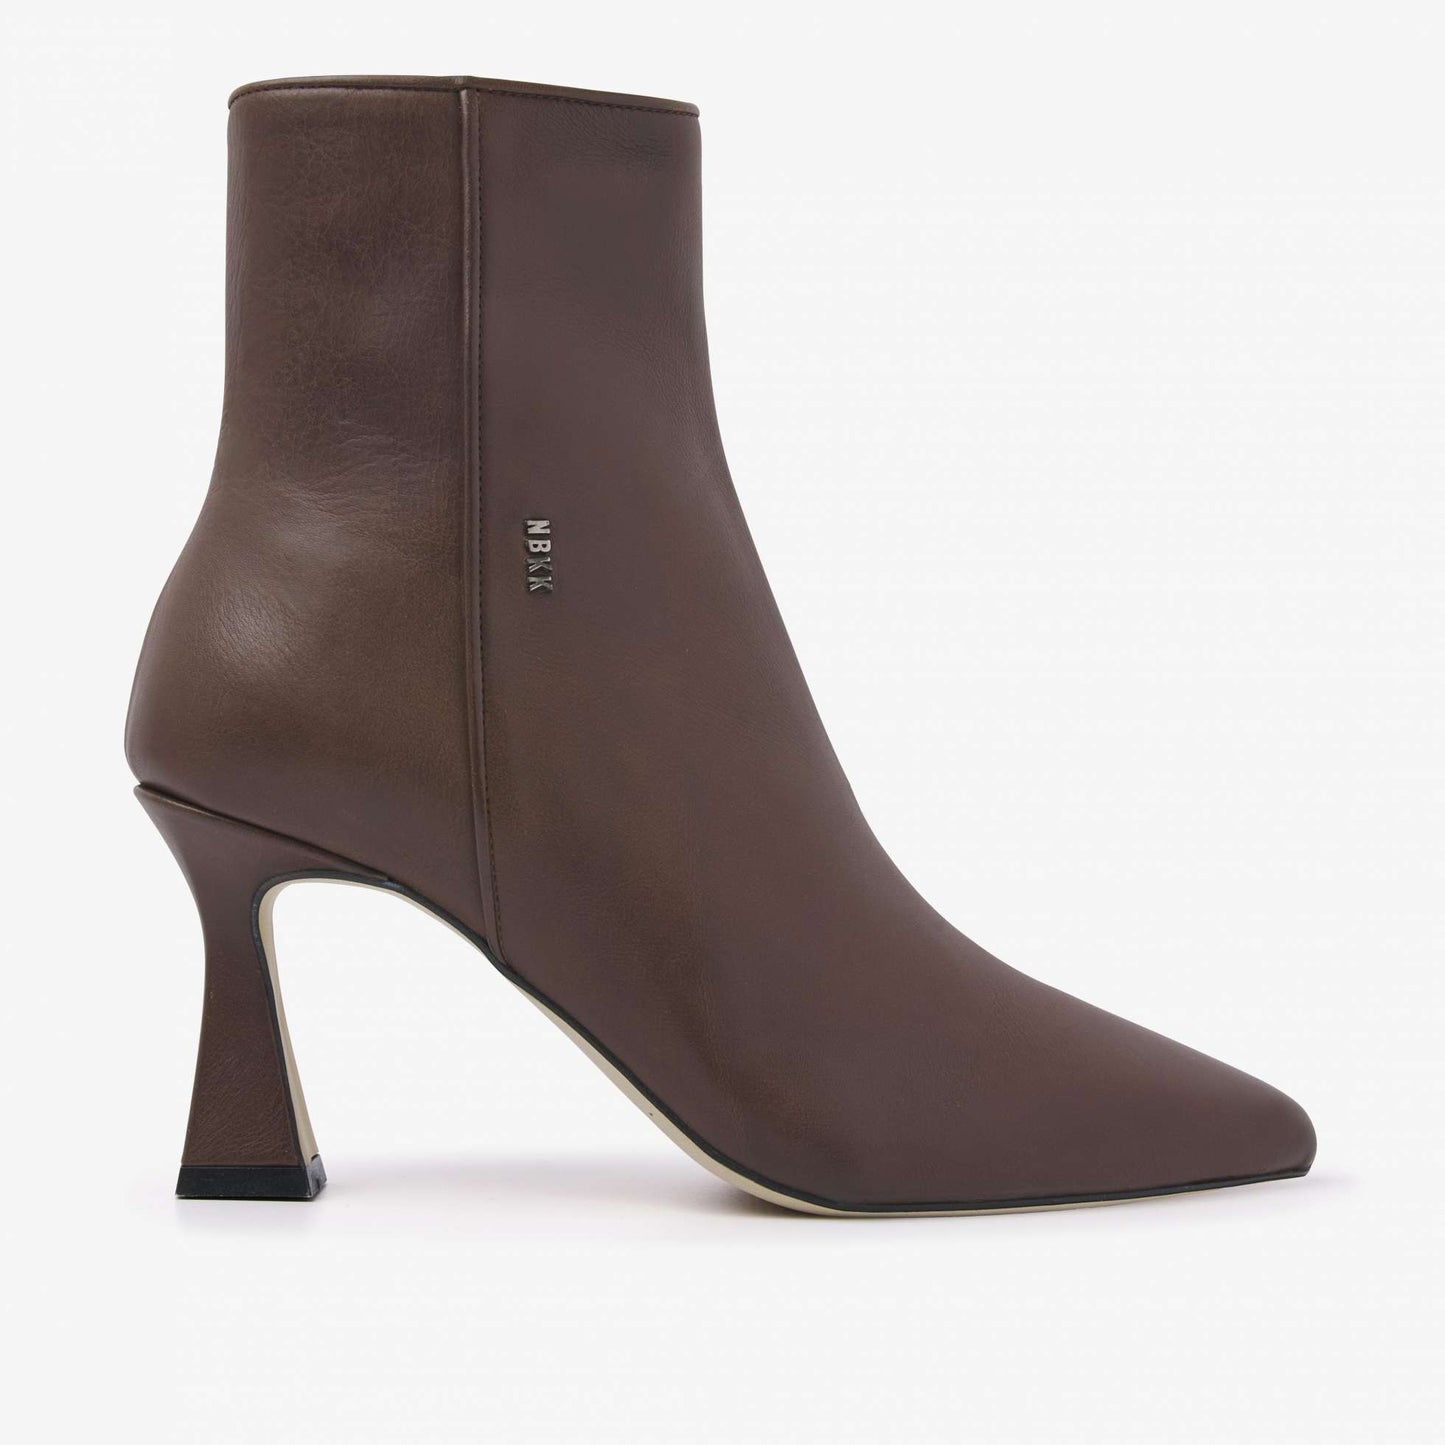 ACE YADA STILETTO BROWN LEATHER